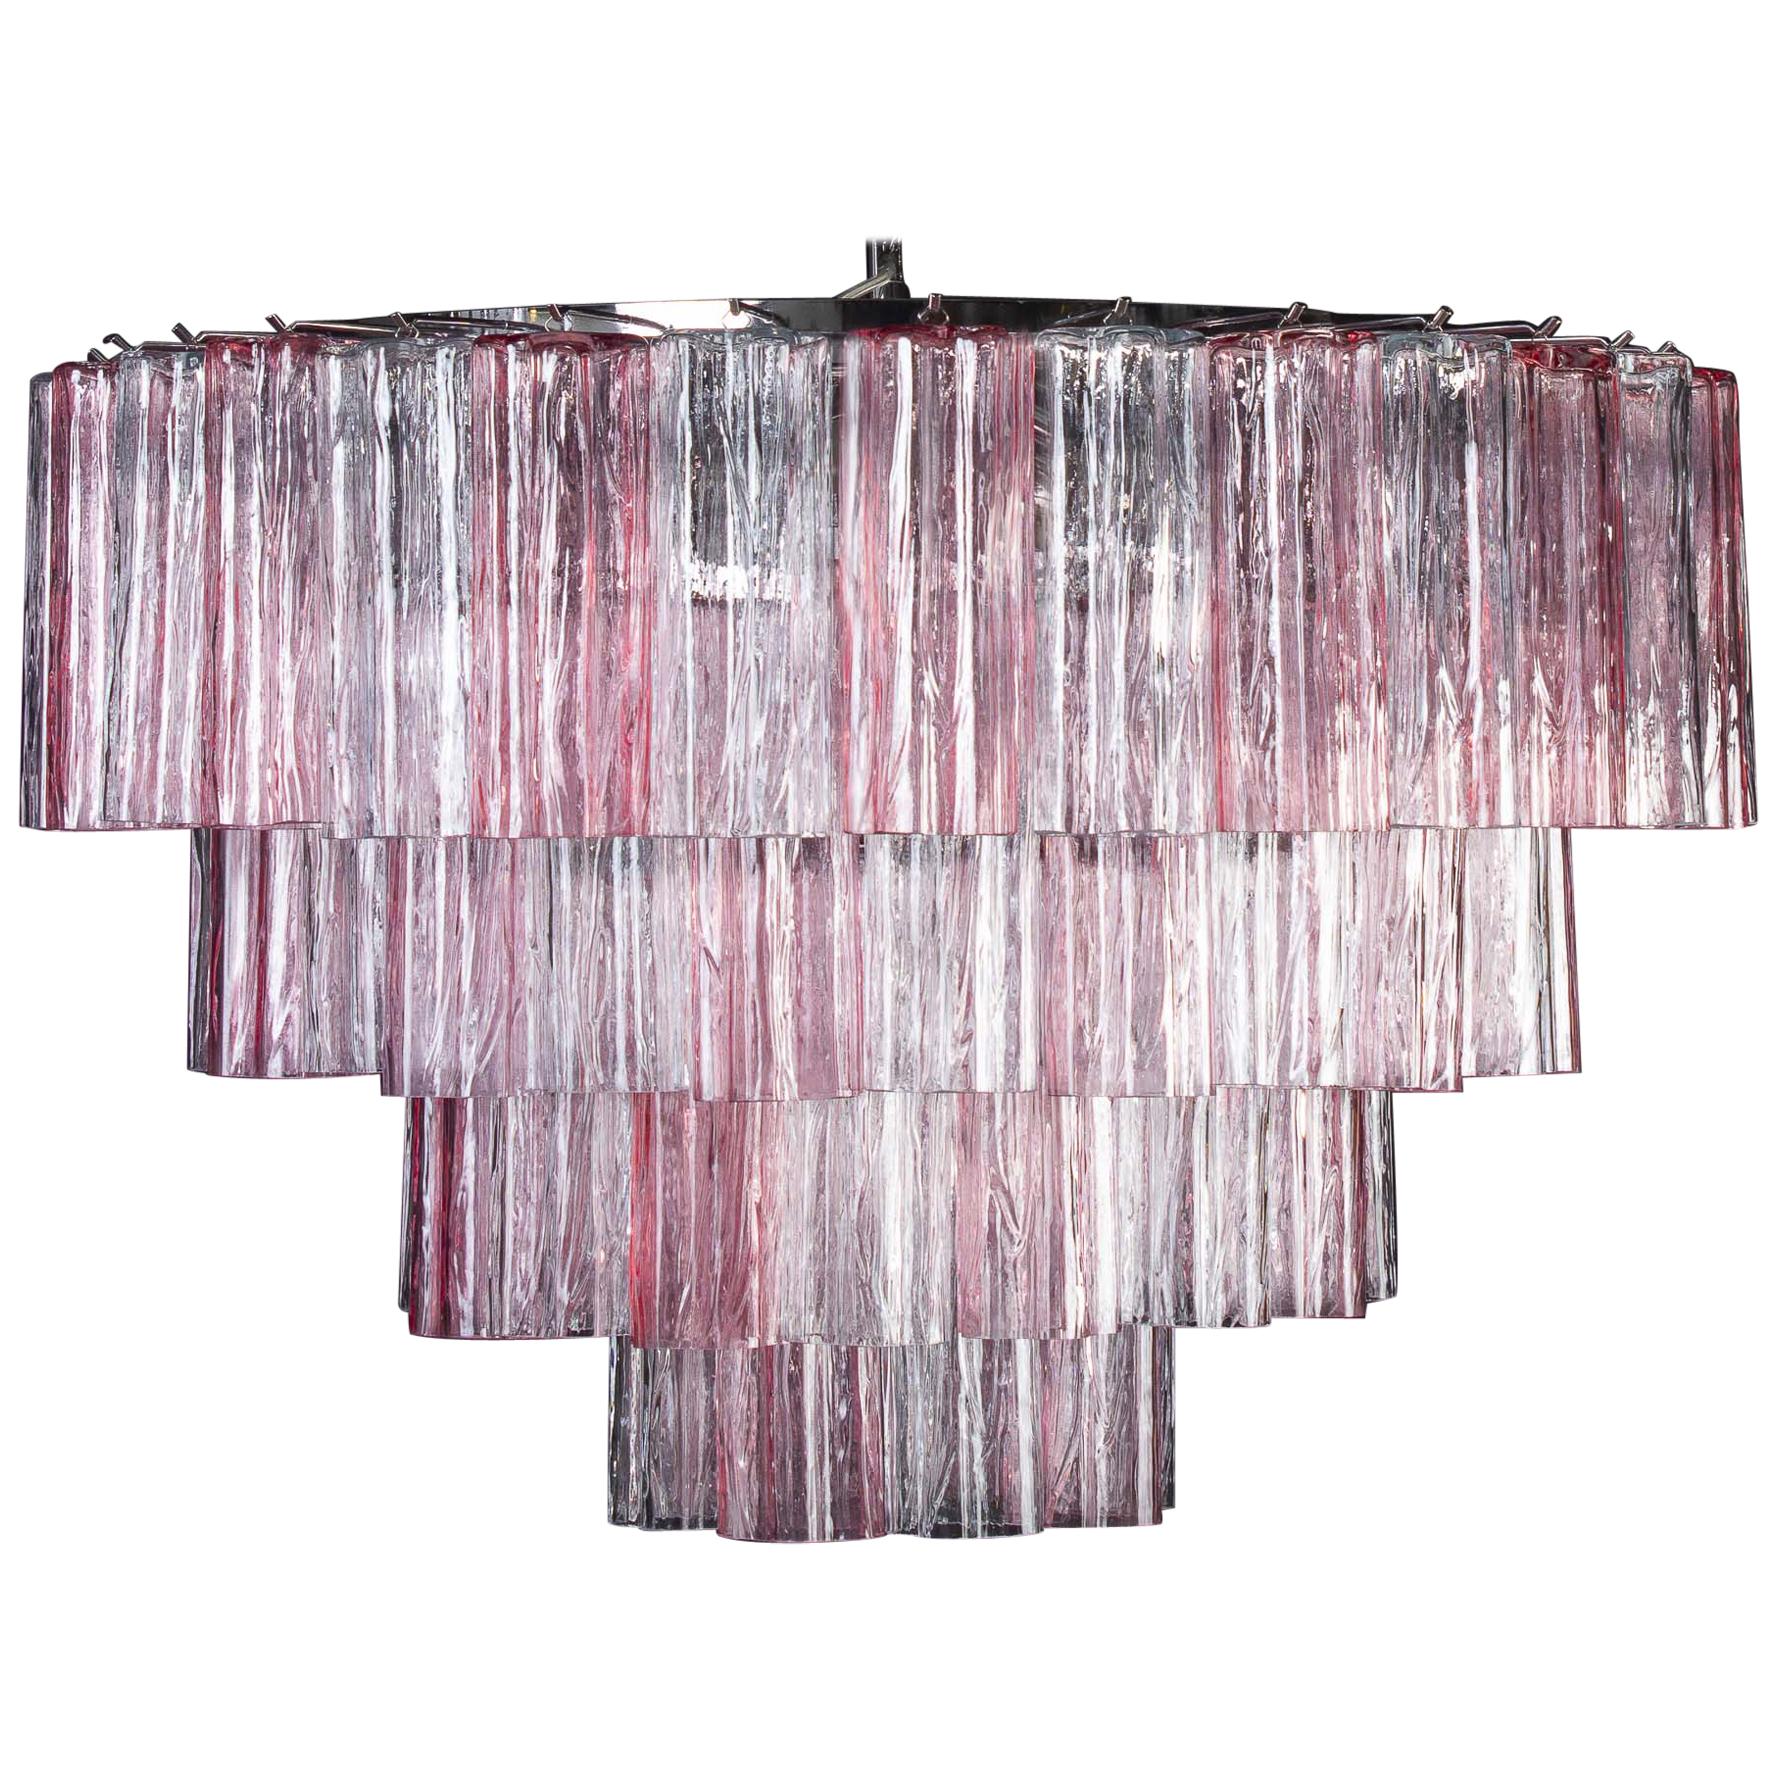 This extraordinary chandeliers is composed by 78 pink and ice color Murano glass 'Tronchi'
by 20 cm high.


